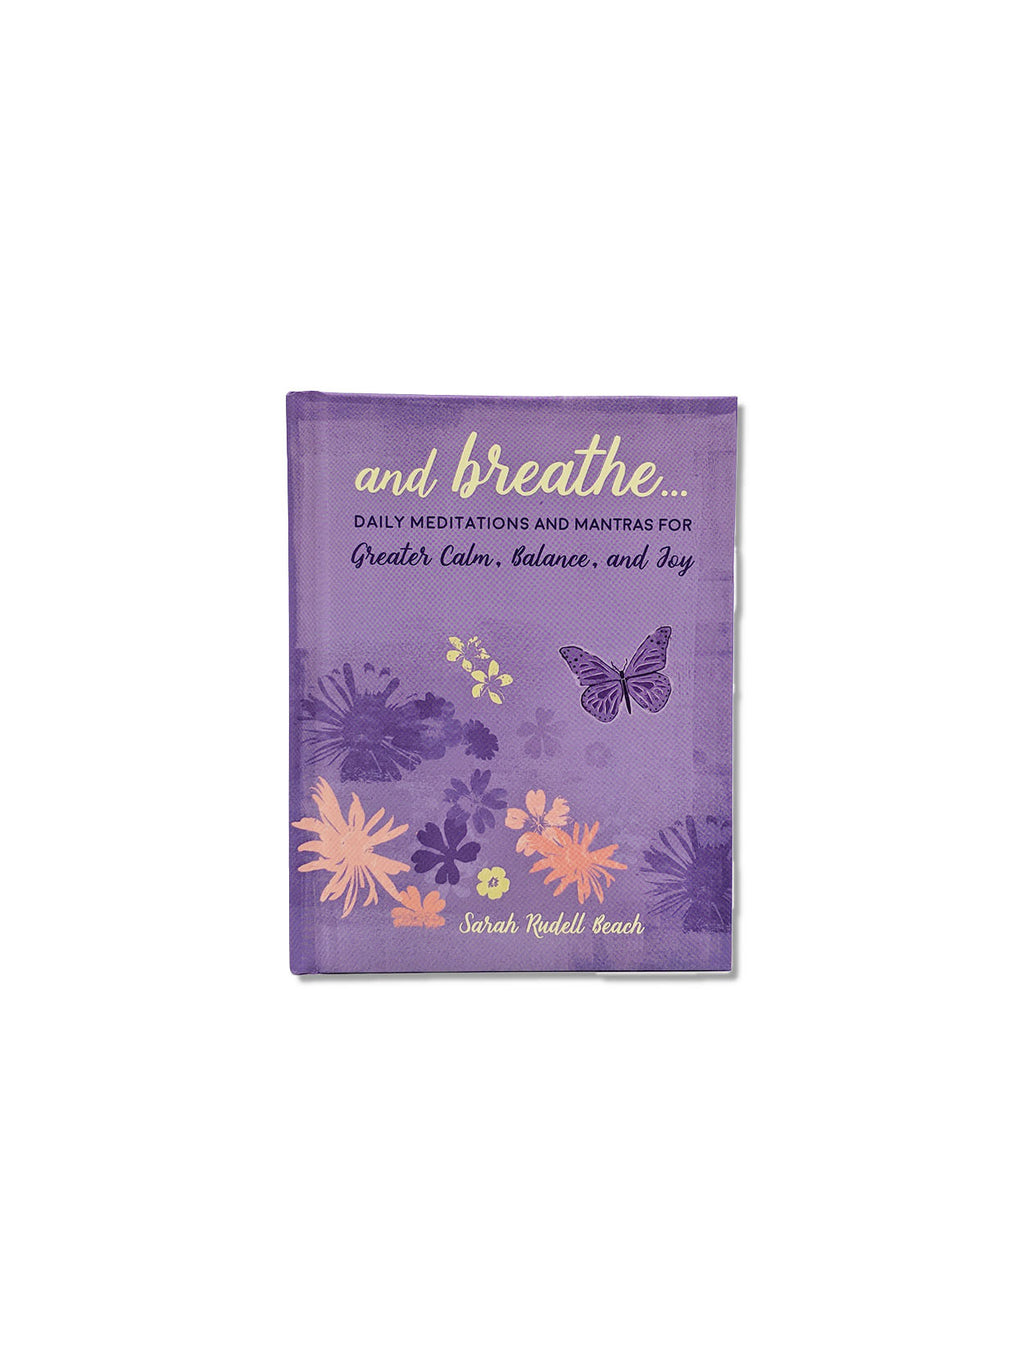 And Breathe... : Daily Meditations and Mantras for Greater Calm, Balance, and Joy